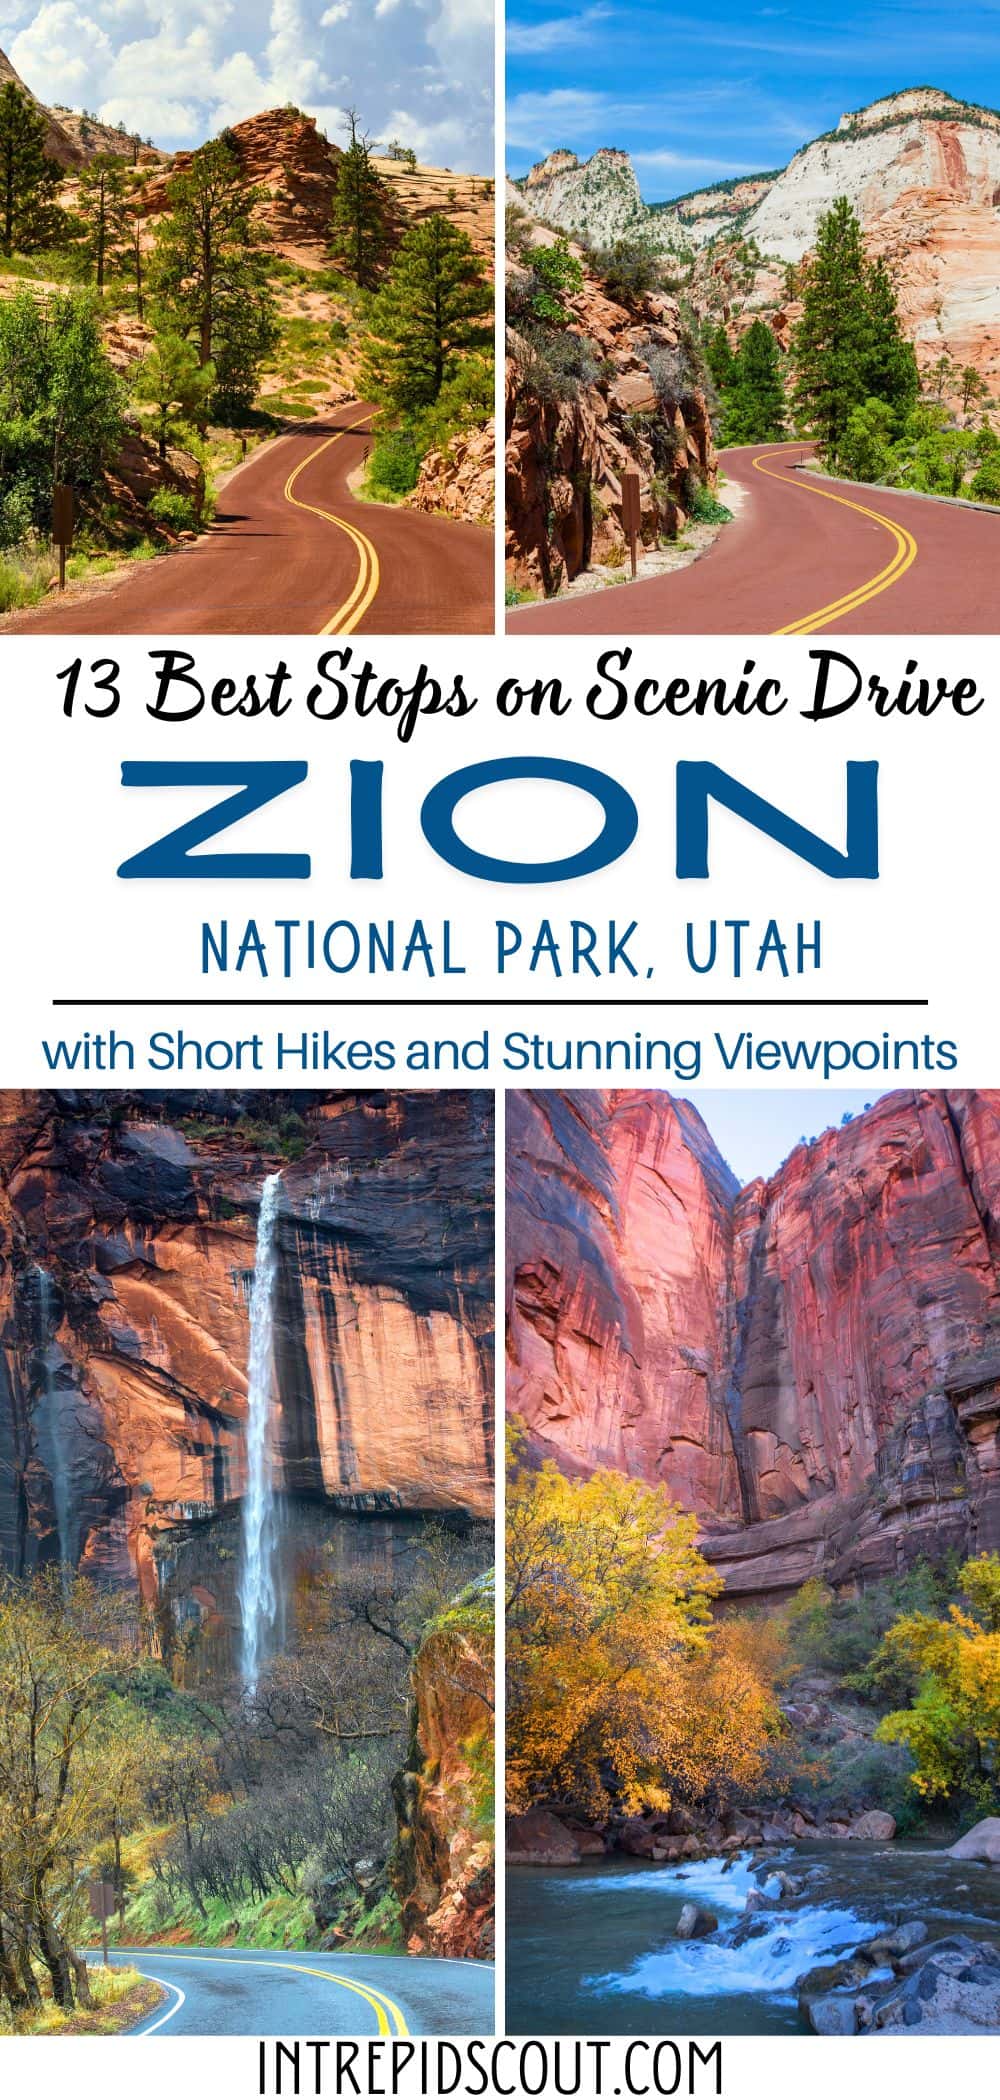 Best Stops on Scenic Drive in Zion